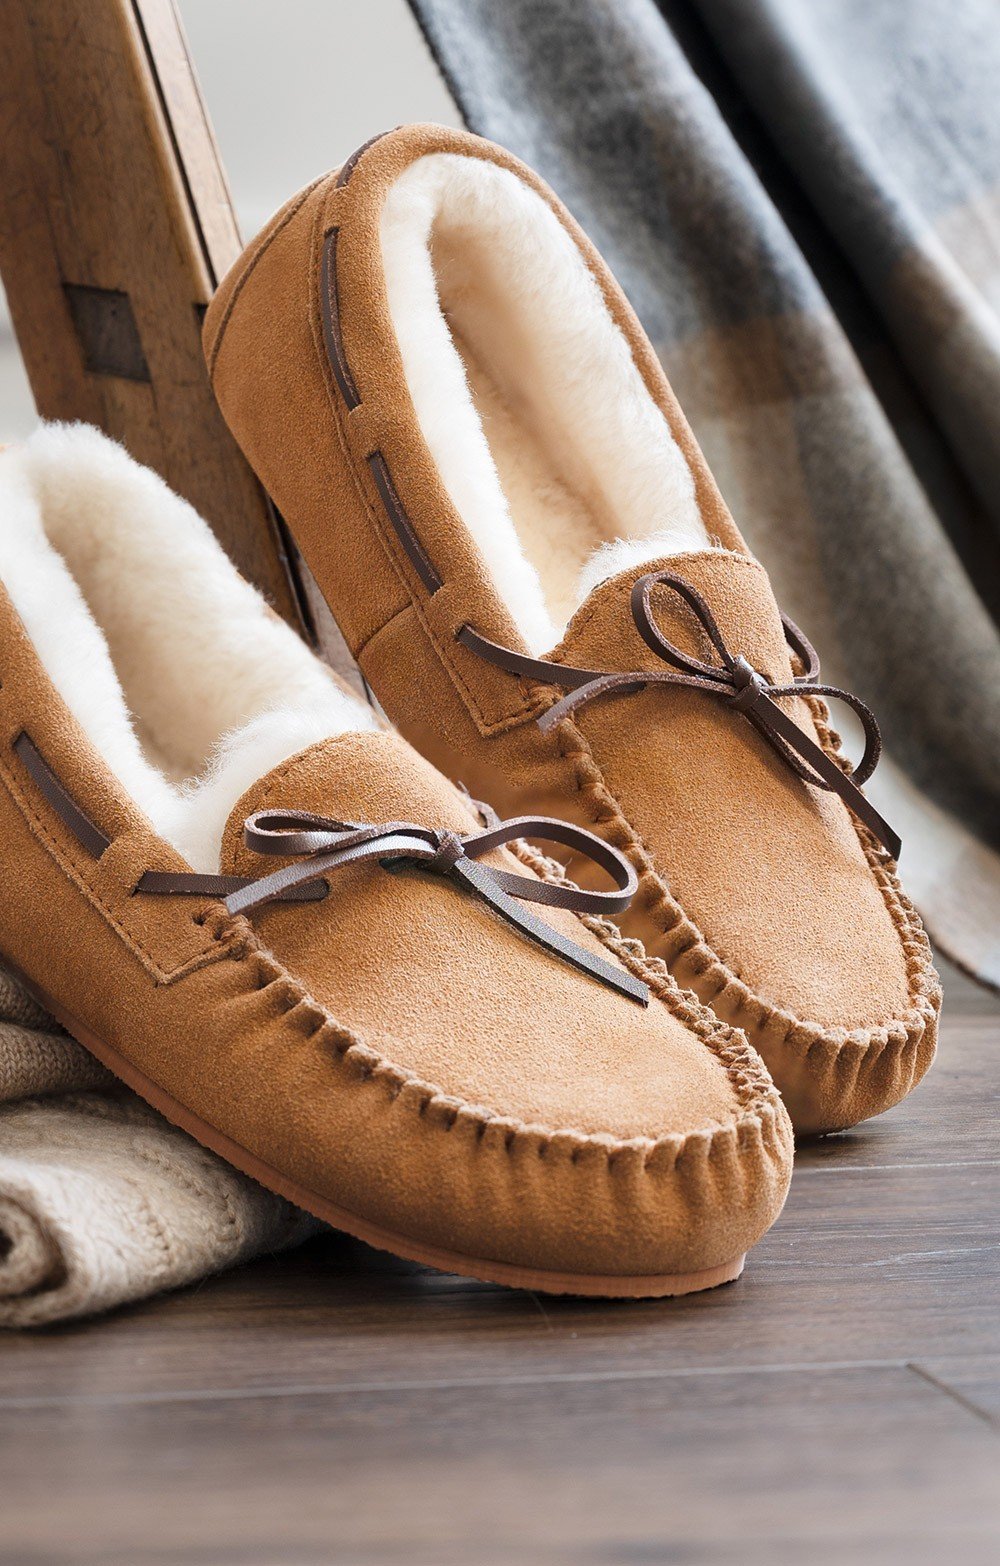 moccasin house slippers